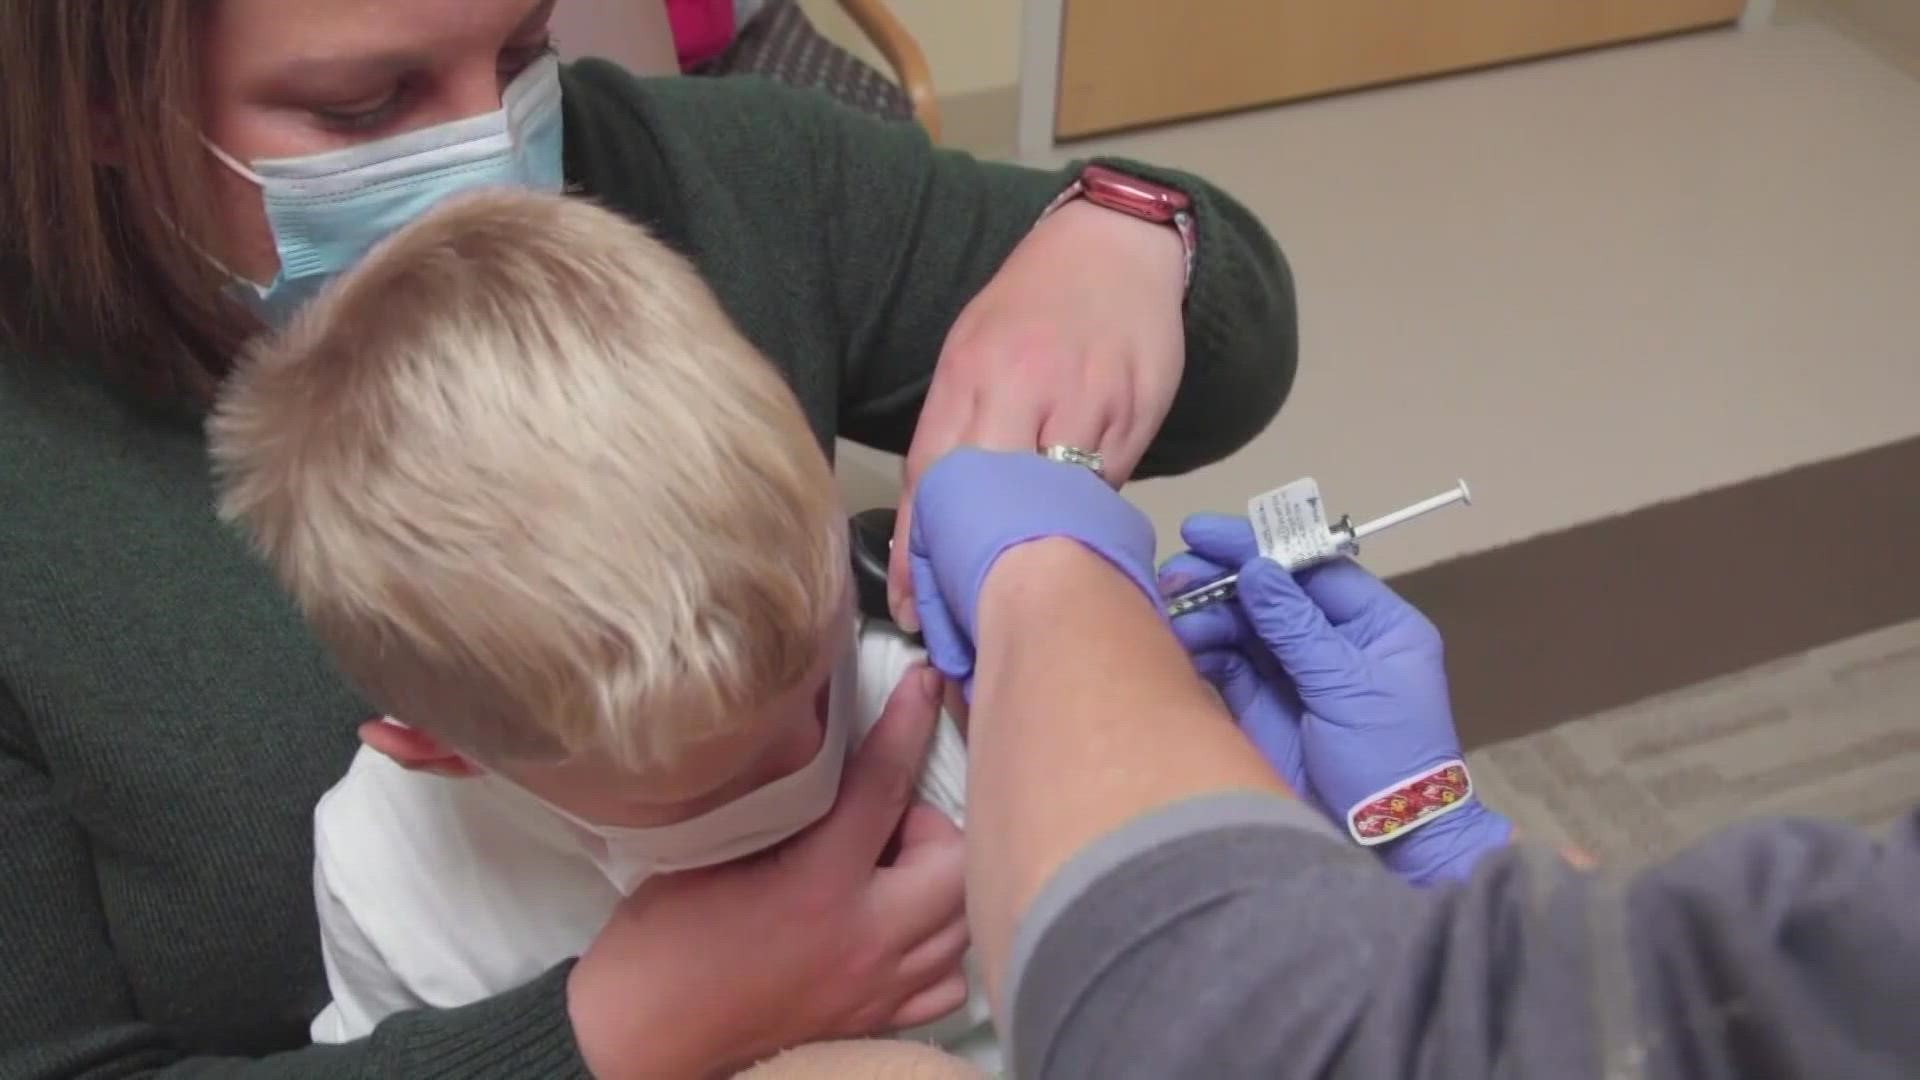 Vaccine providers around the Triad will start offering the shot to younger kids this week.